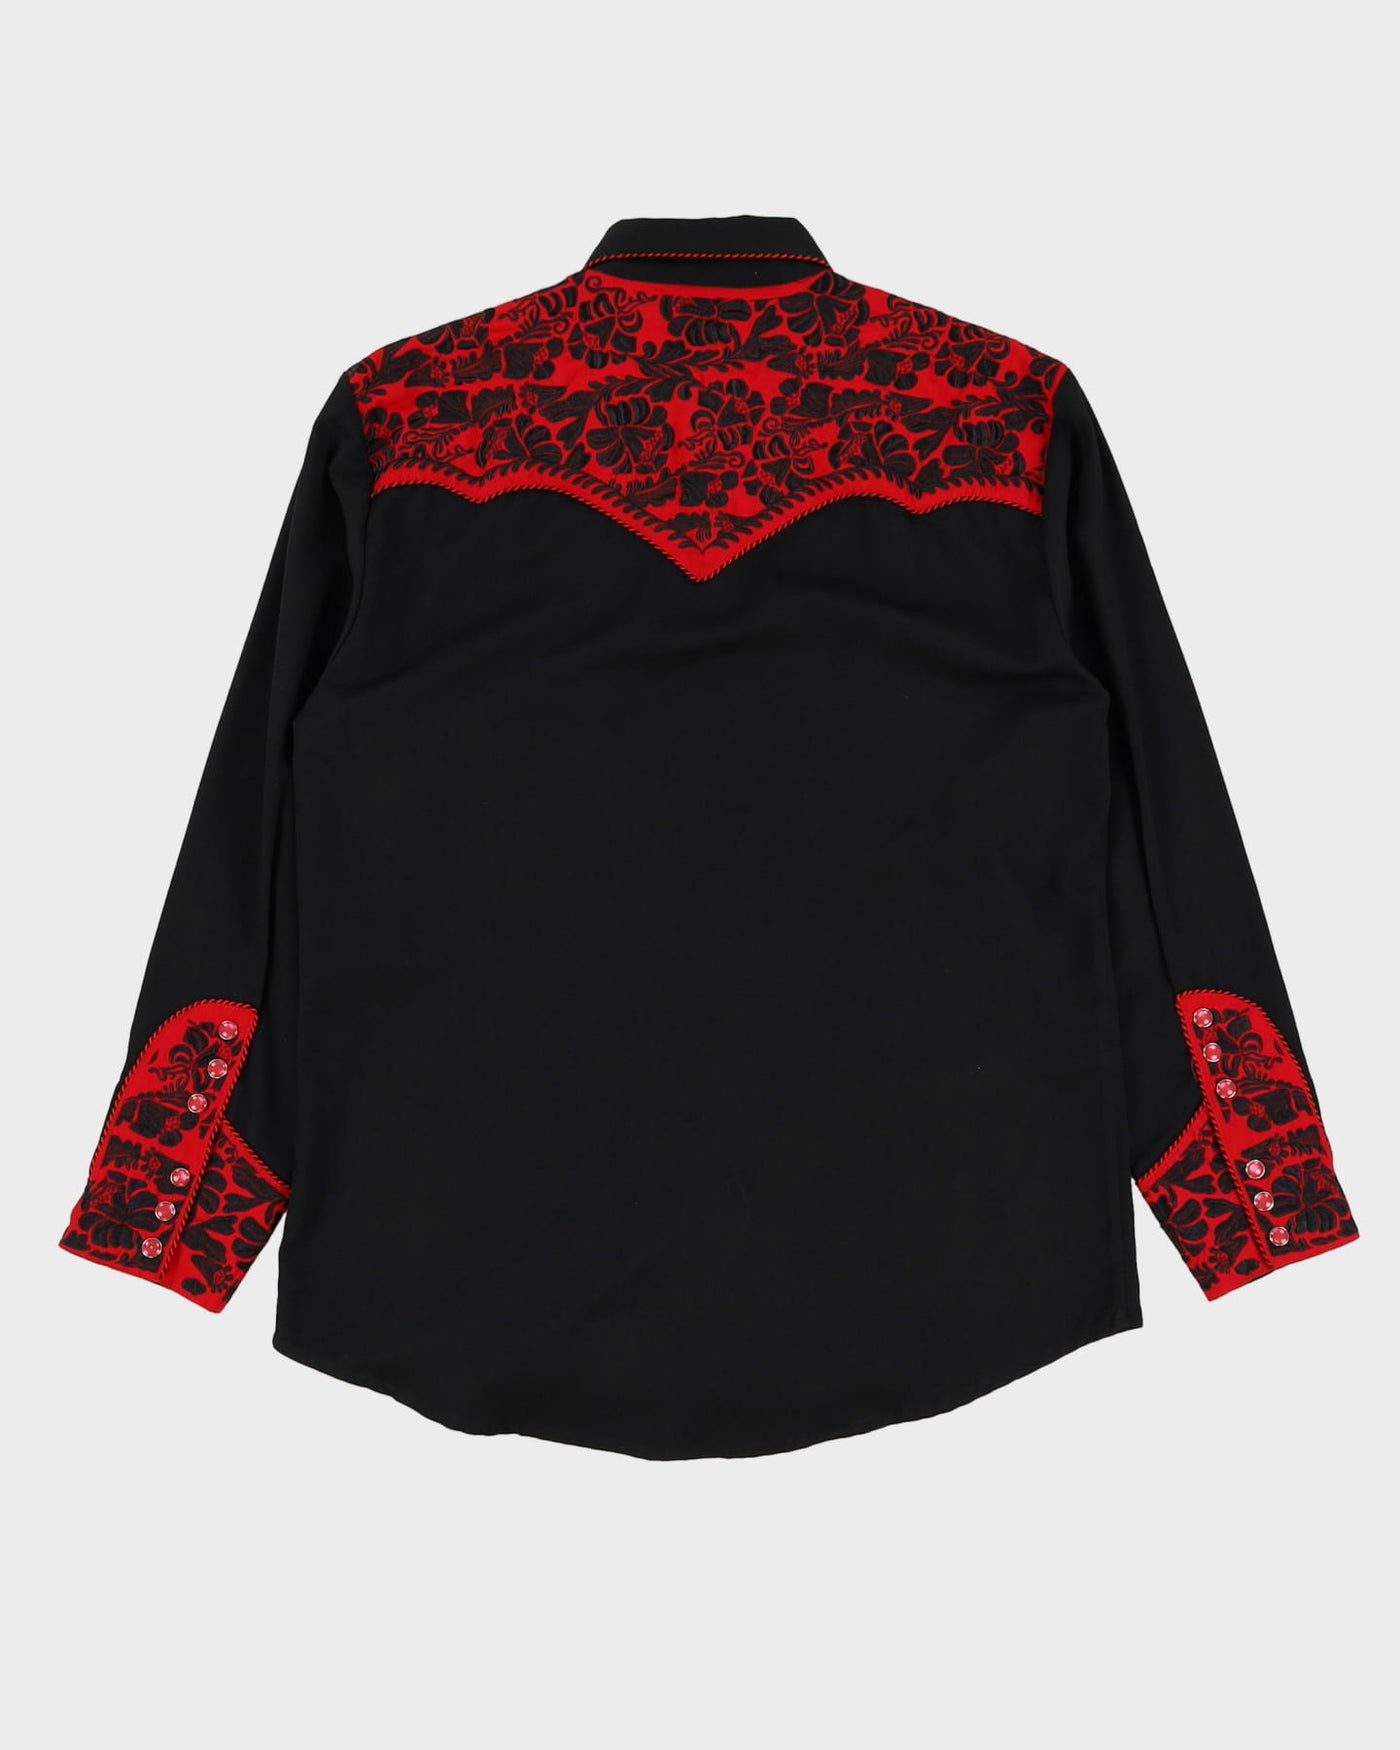 Vintage Scully Black / Red Western Shirt - M